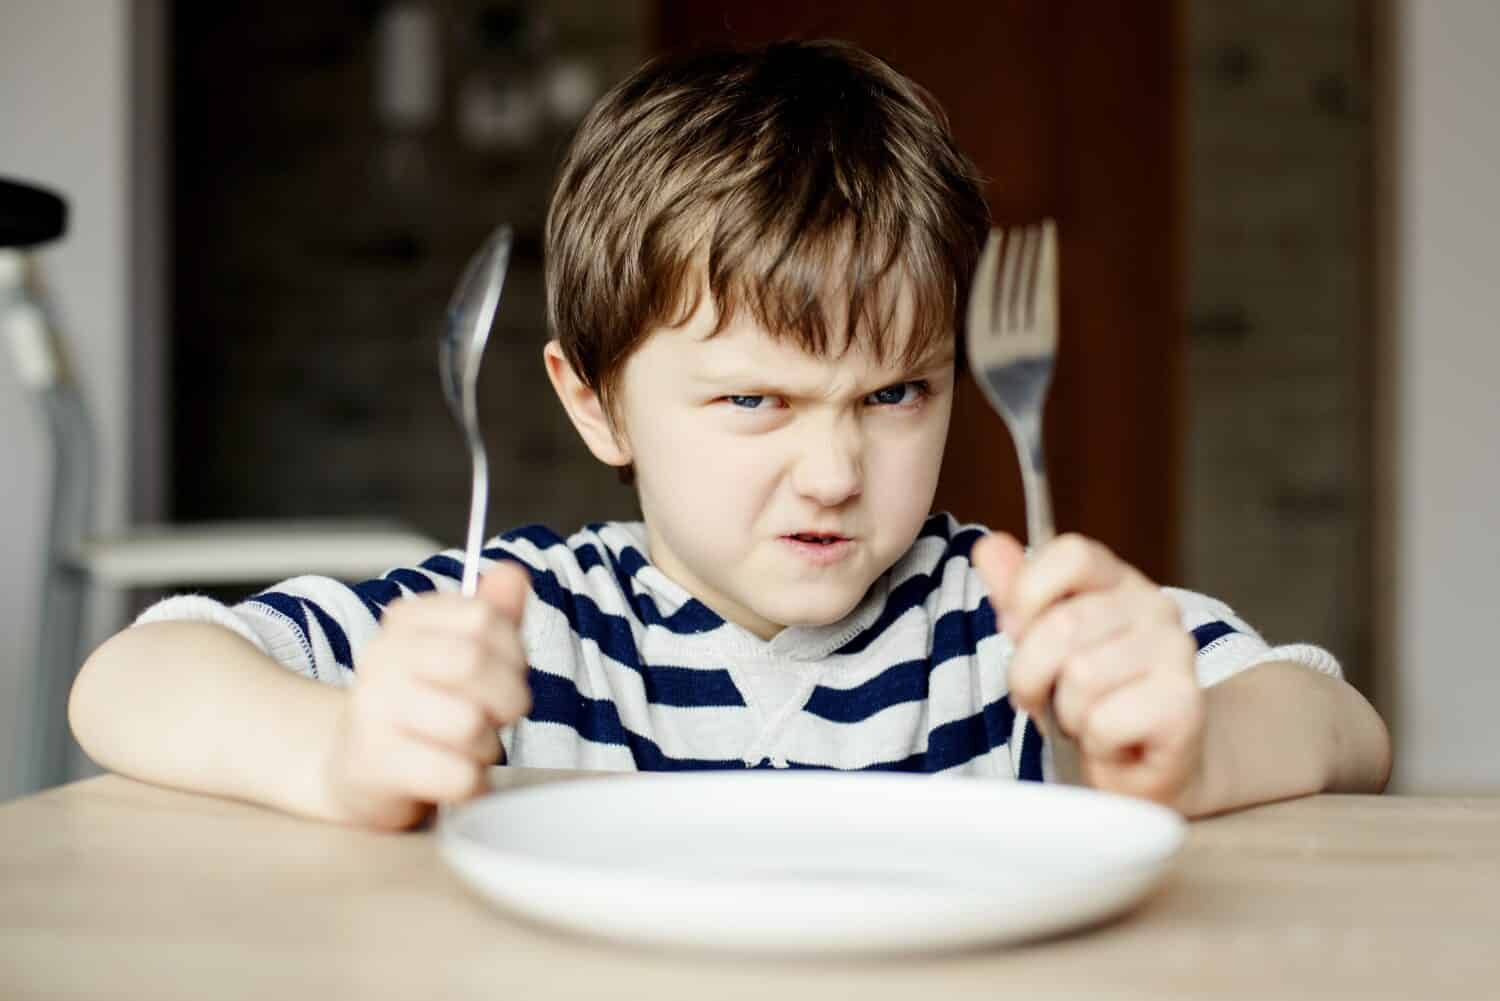 Furious little boy waiting for dinner. Holding a spoon and fork in the hand